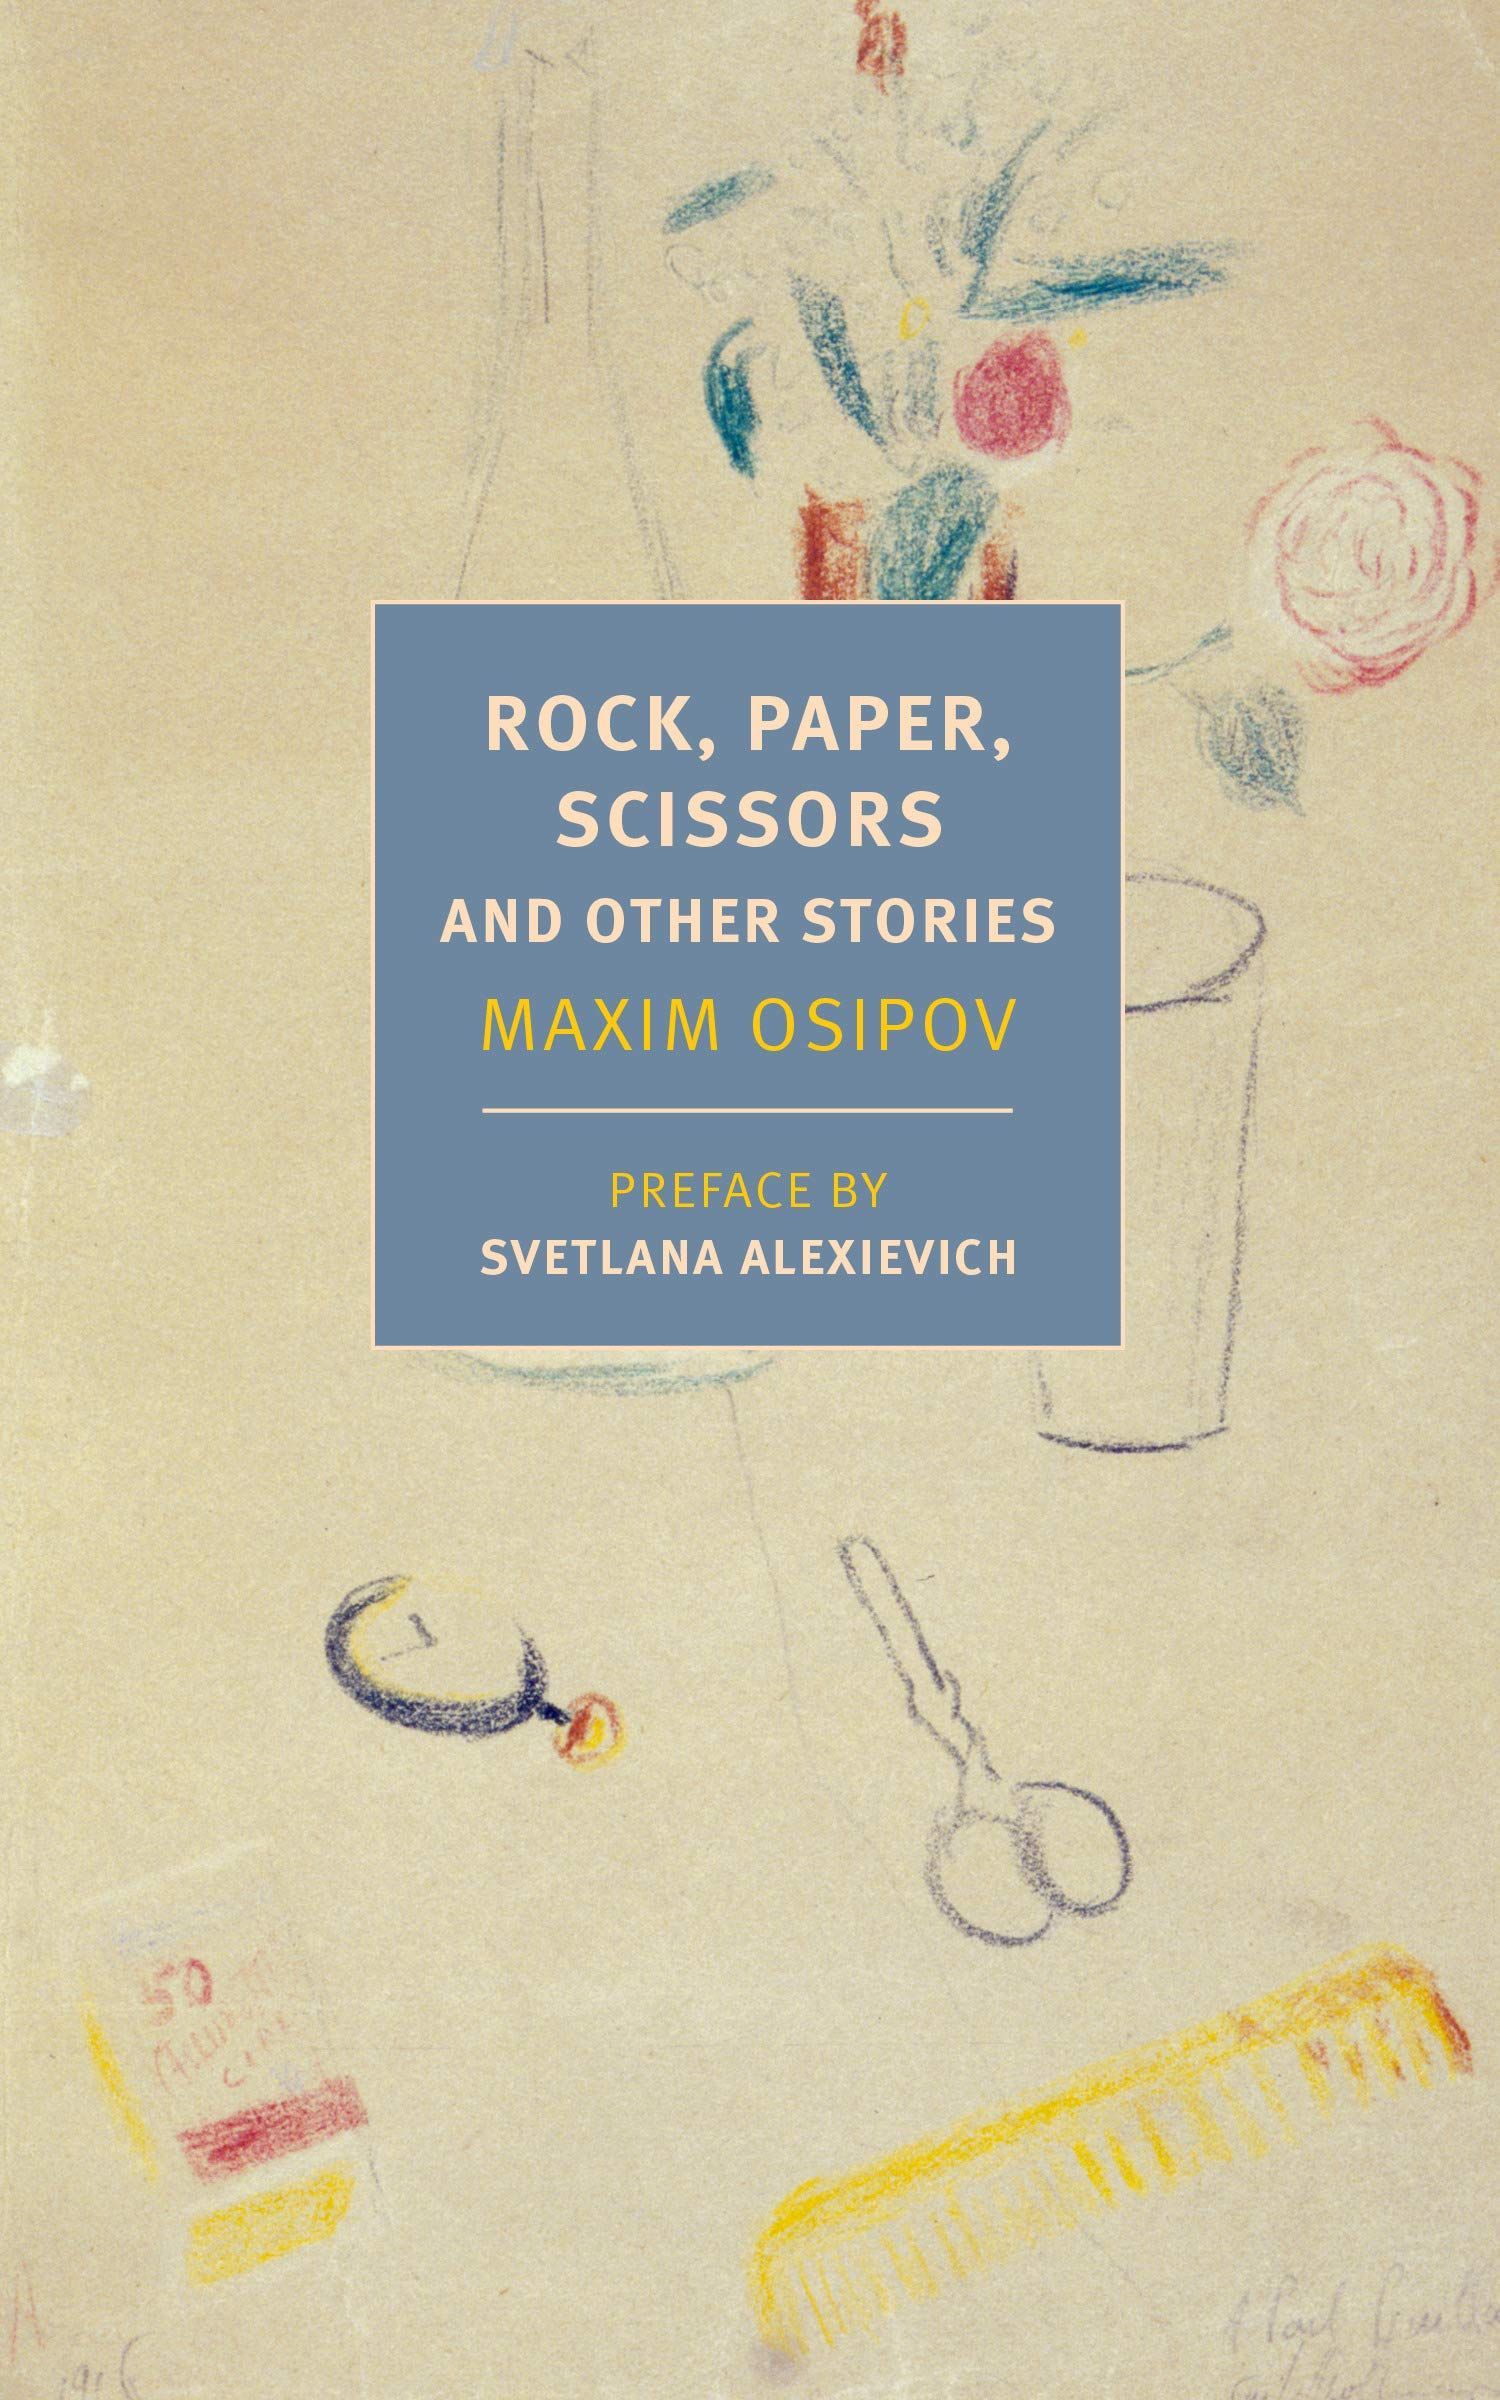 Delicate Mundanity: On Maxim Osipov’s “Rock, Paper, Scissors: And Other Stories”